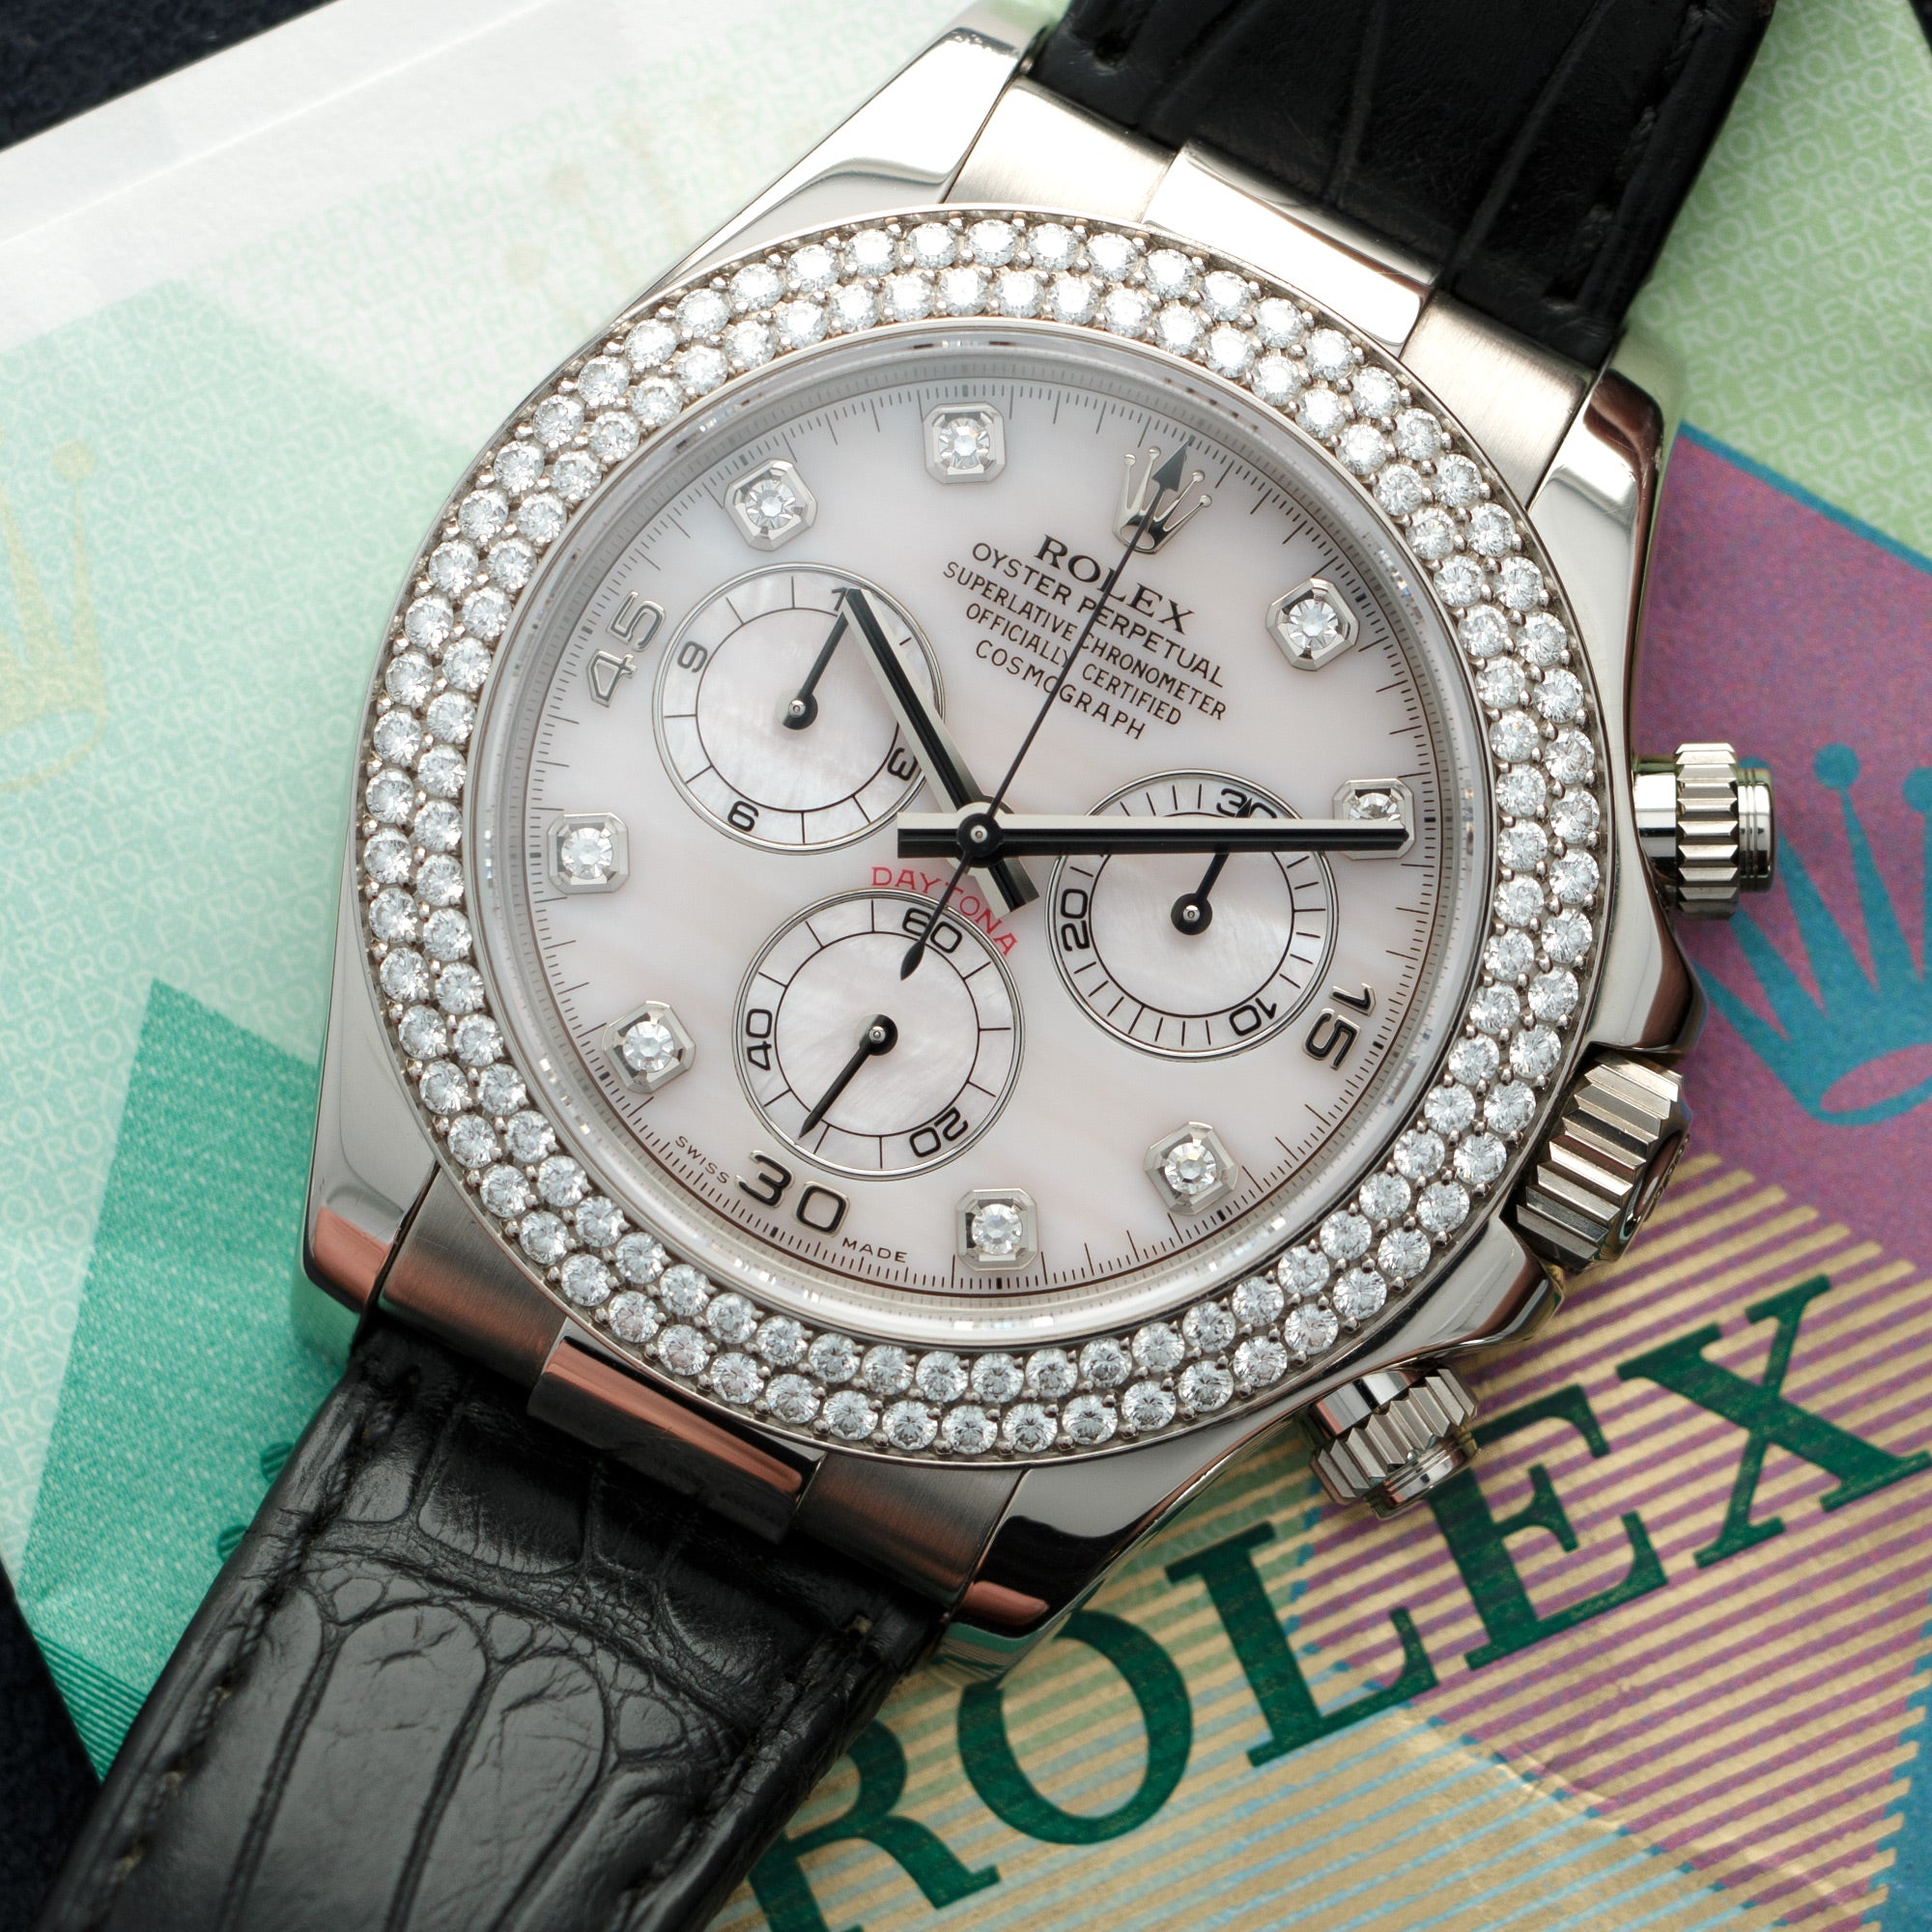 Rolex - Rolex Daytona White Gold with diamond bezel and Mother of pearl diamond dial Ref. 116589 - The Keystone Watches